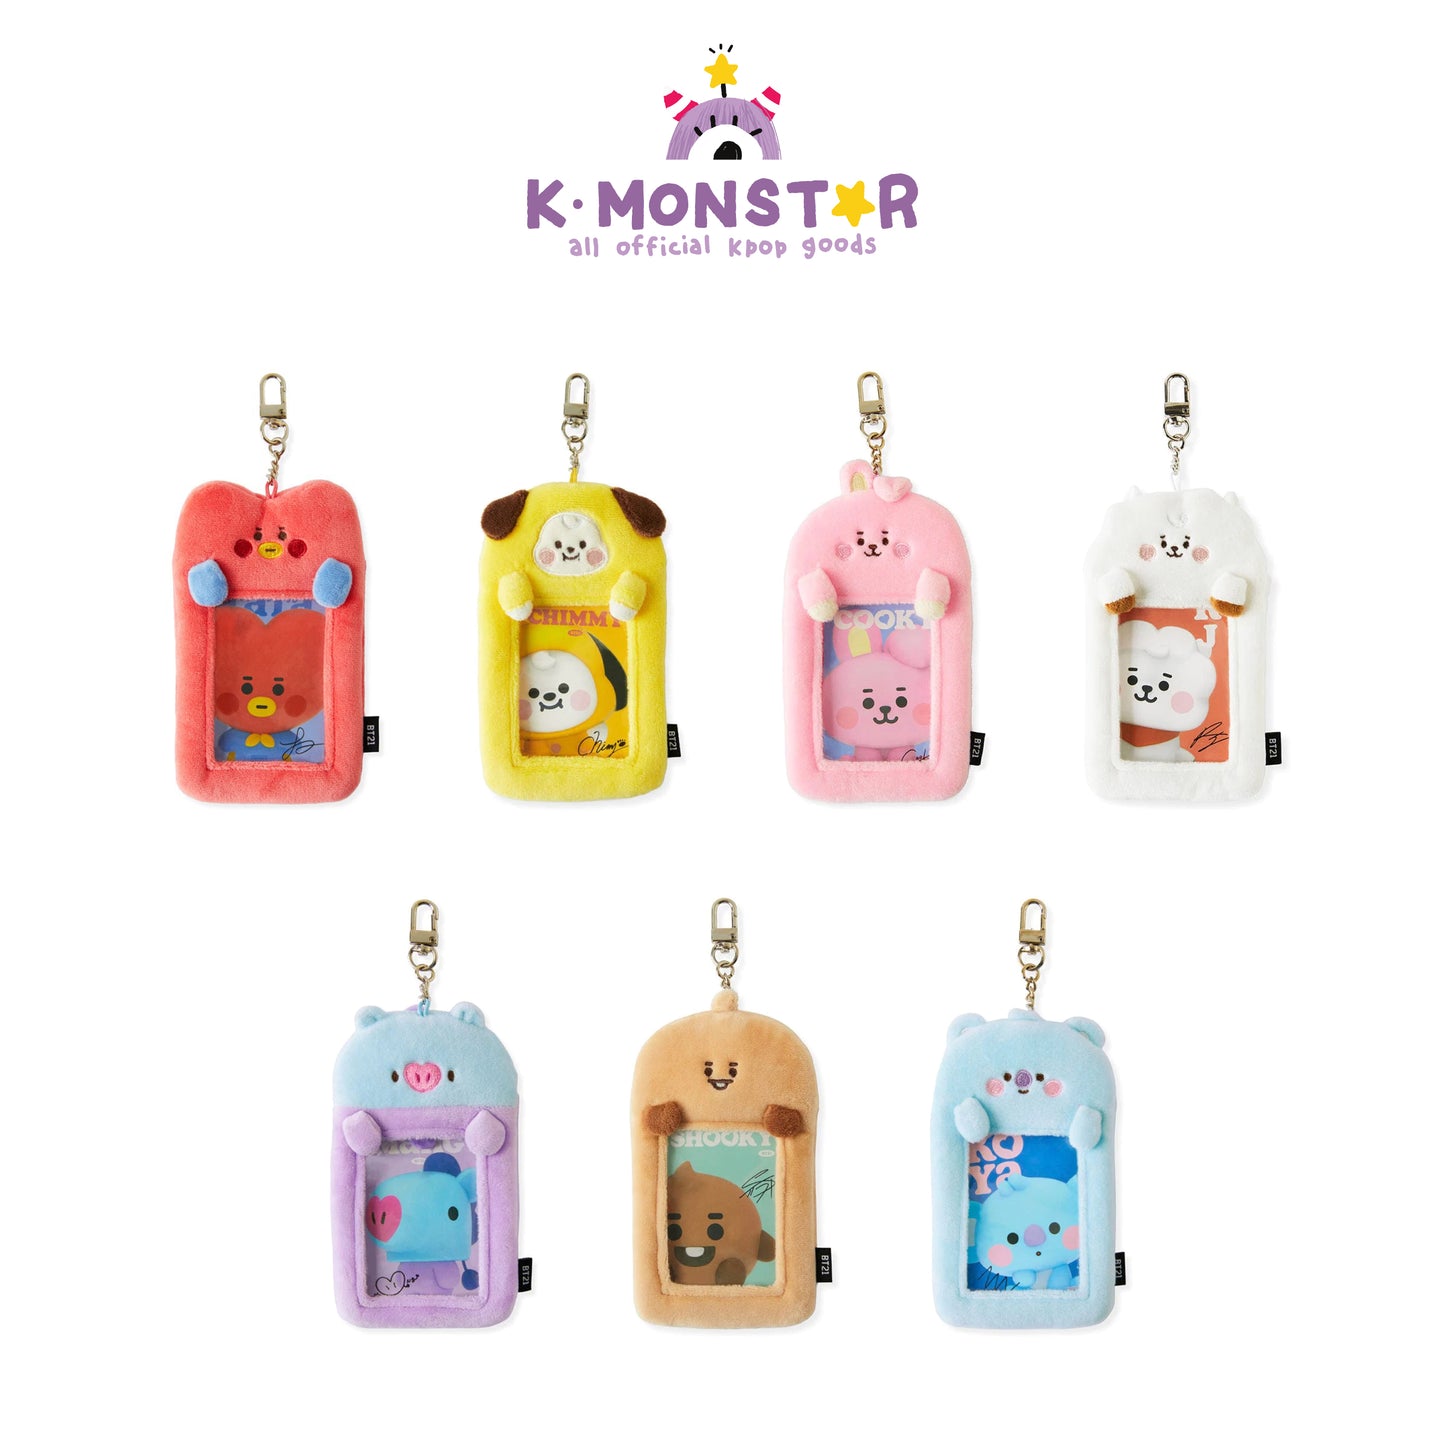 BT21 | BABY | STUDY WITH ME - PHOTO HOLDER KEYRING